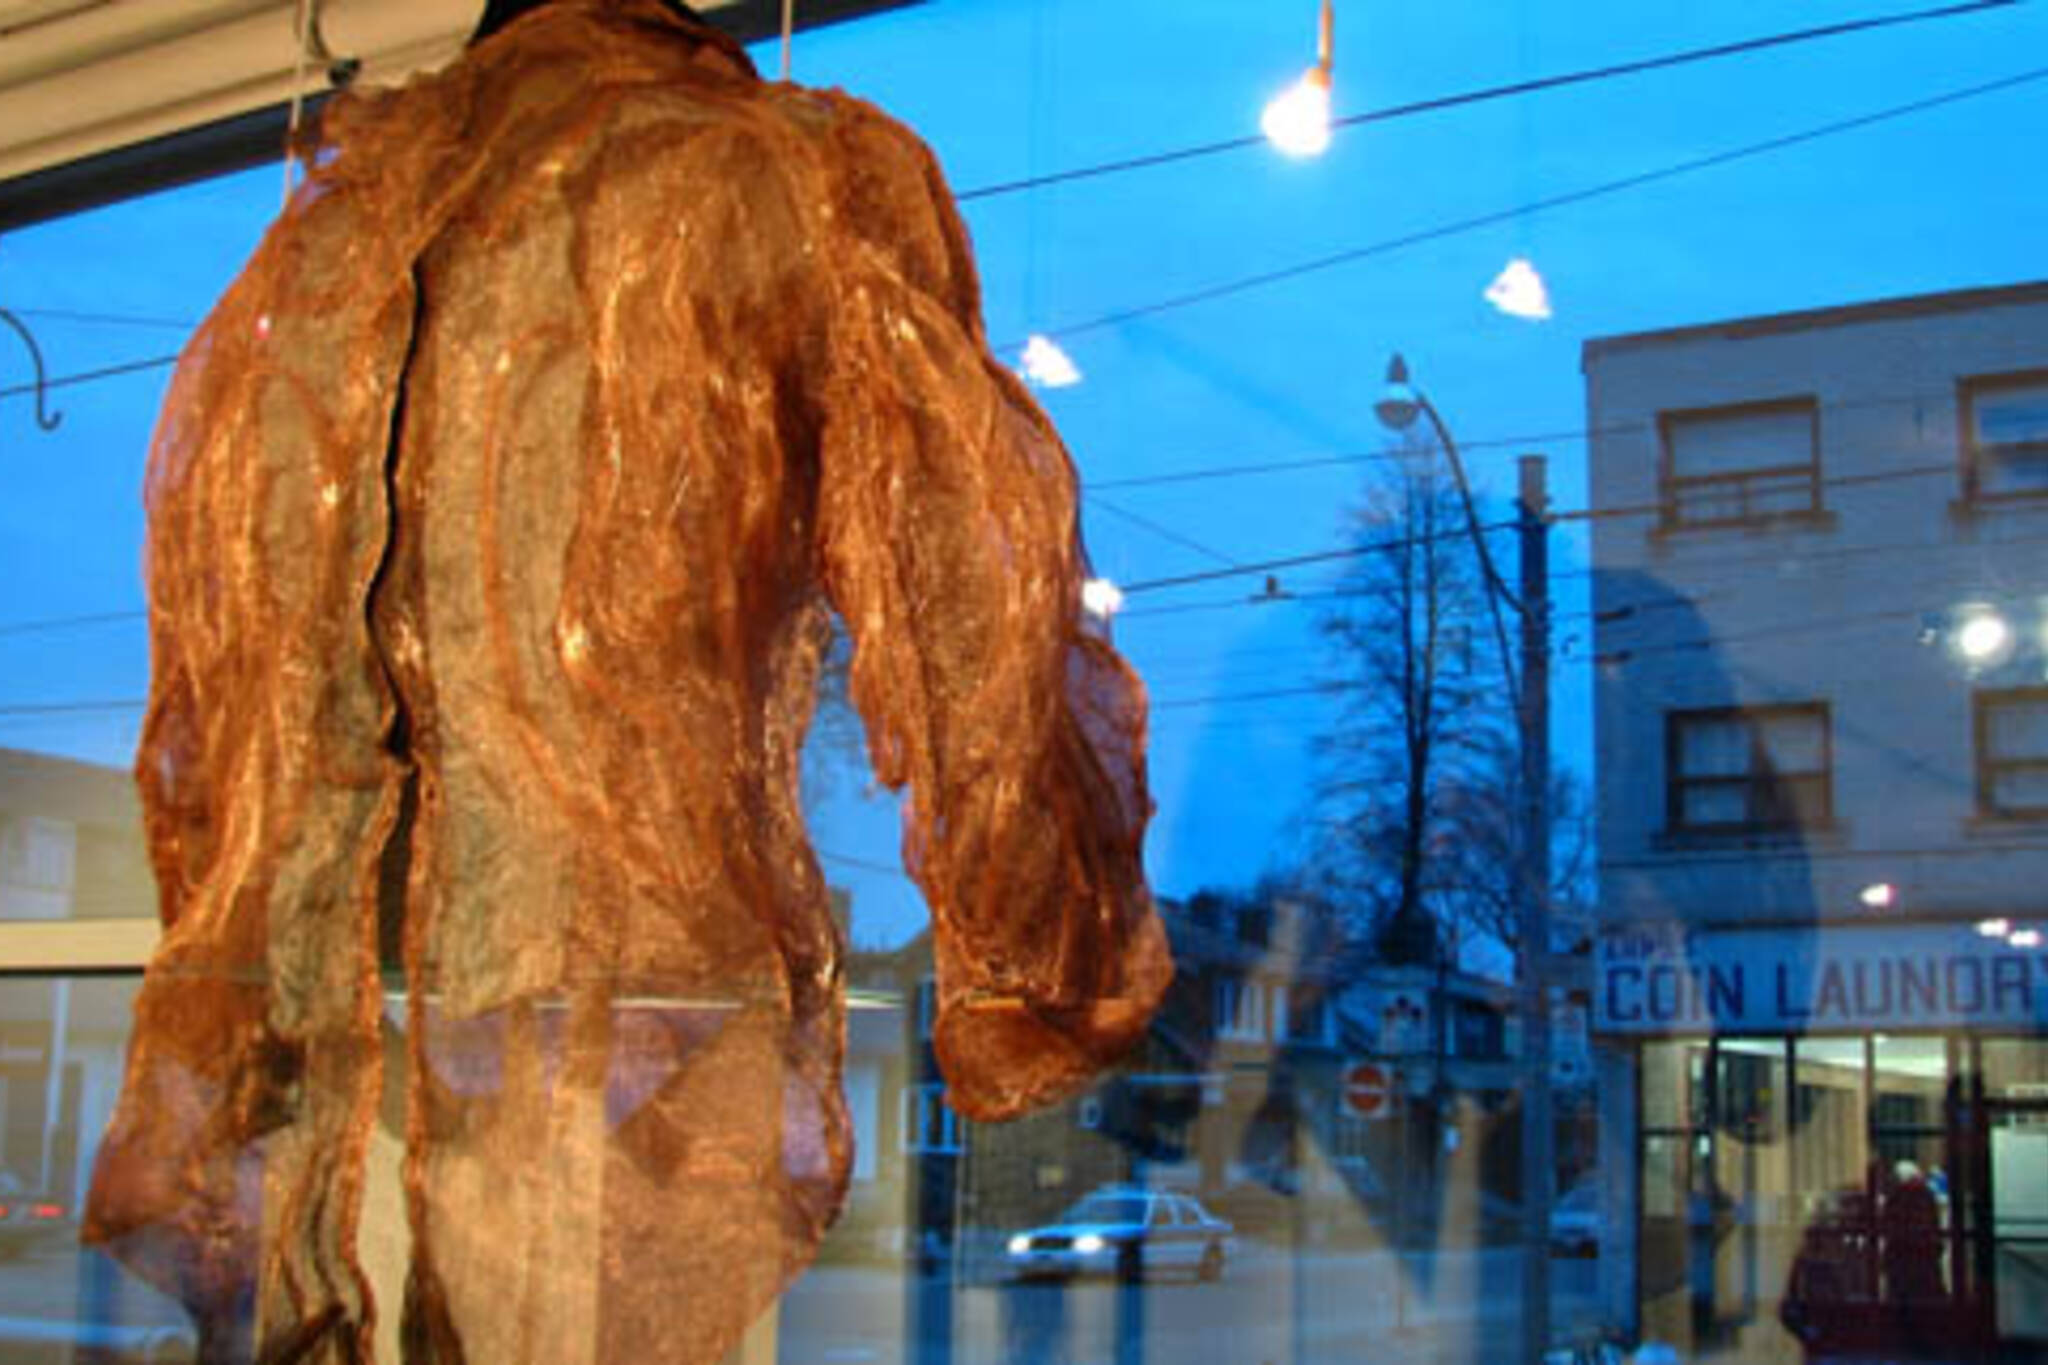 Copper screening jacket by Shelagh Young, part of Domestic Science at the Pentimento Fine Art Gallery